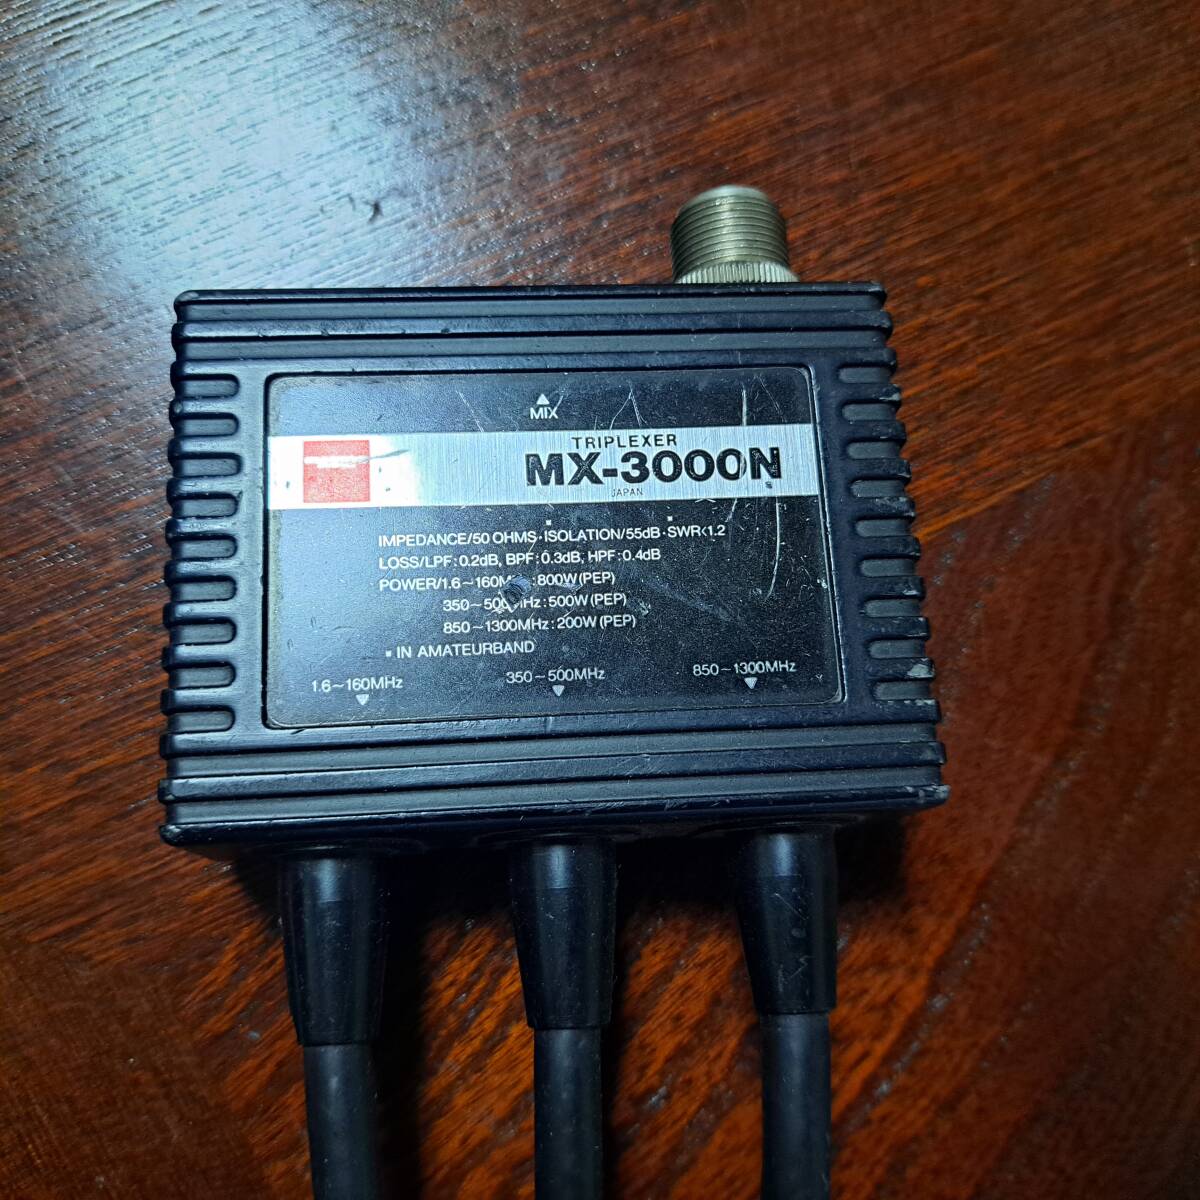  the first radio wave industry MX-3000N used commodity 